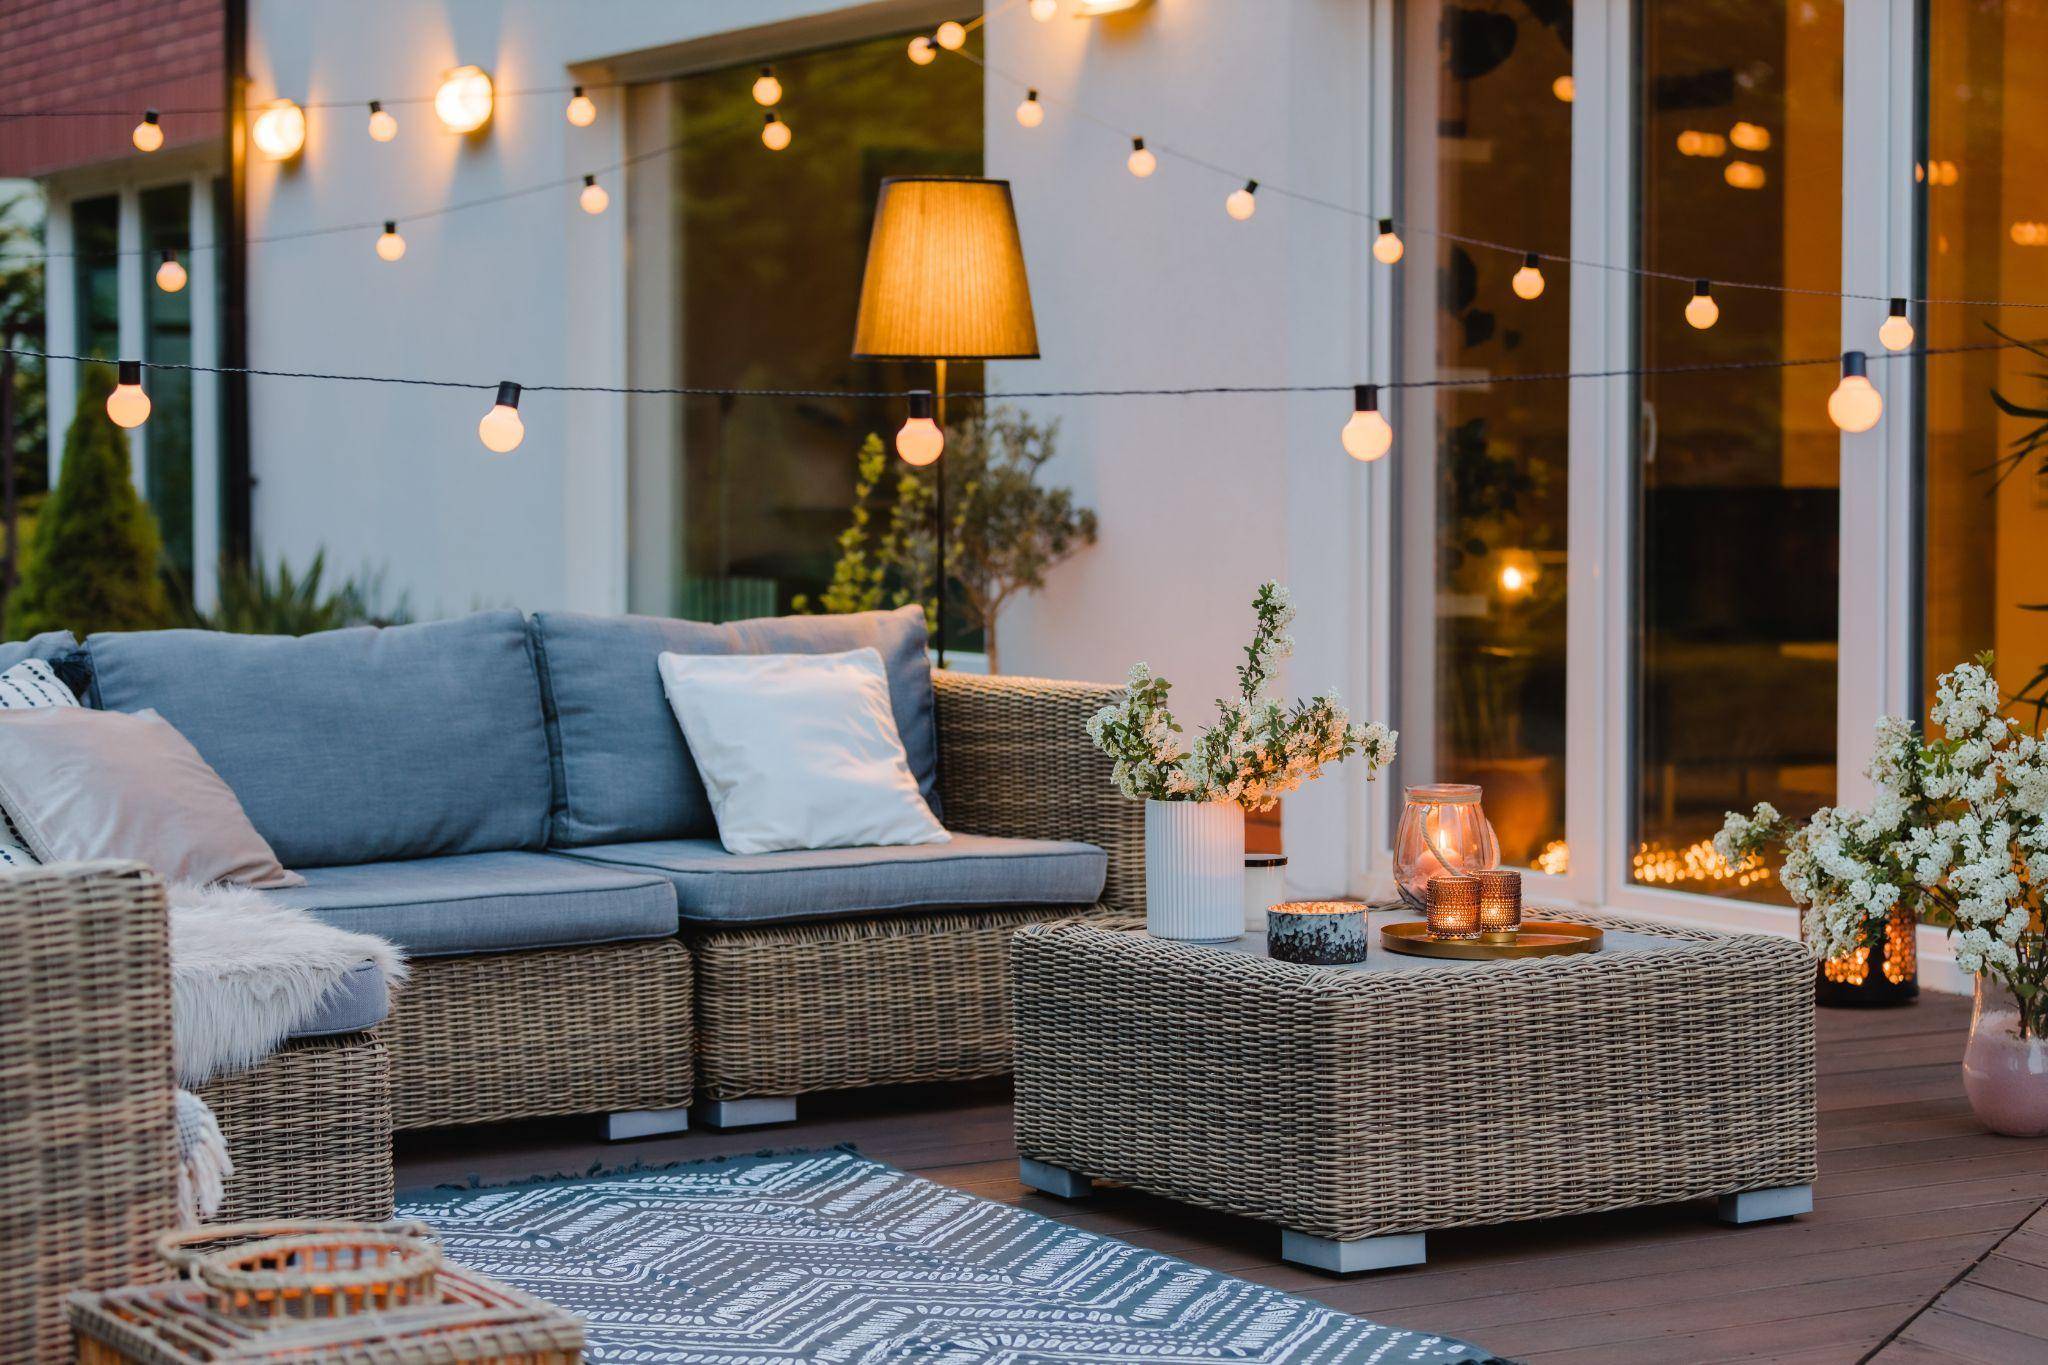 Easy Ways to Update Your Patio for Summer